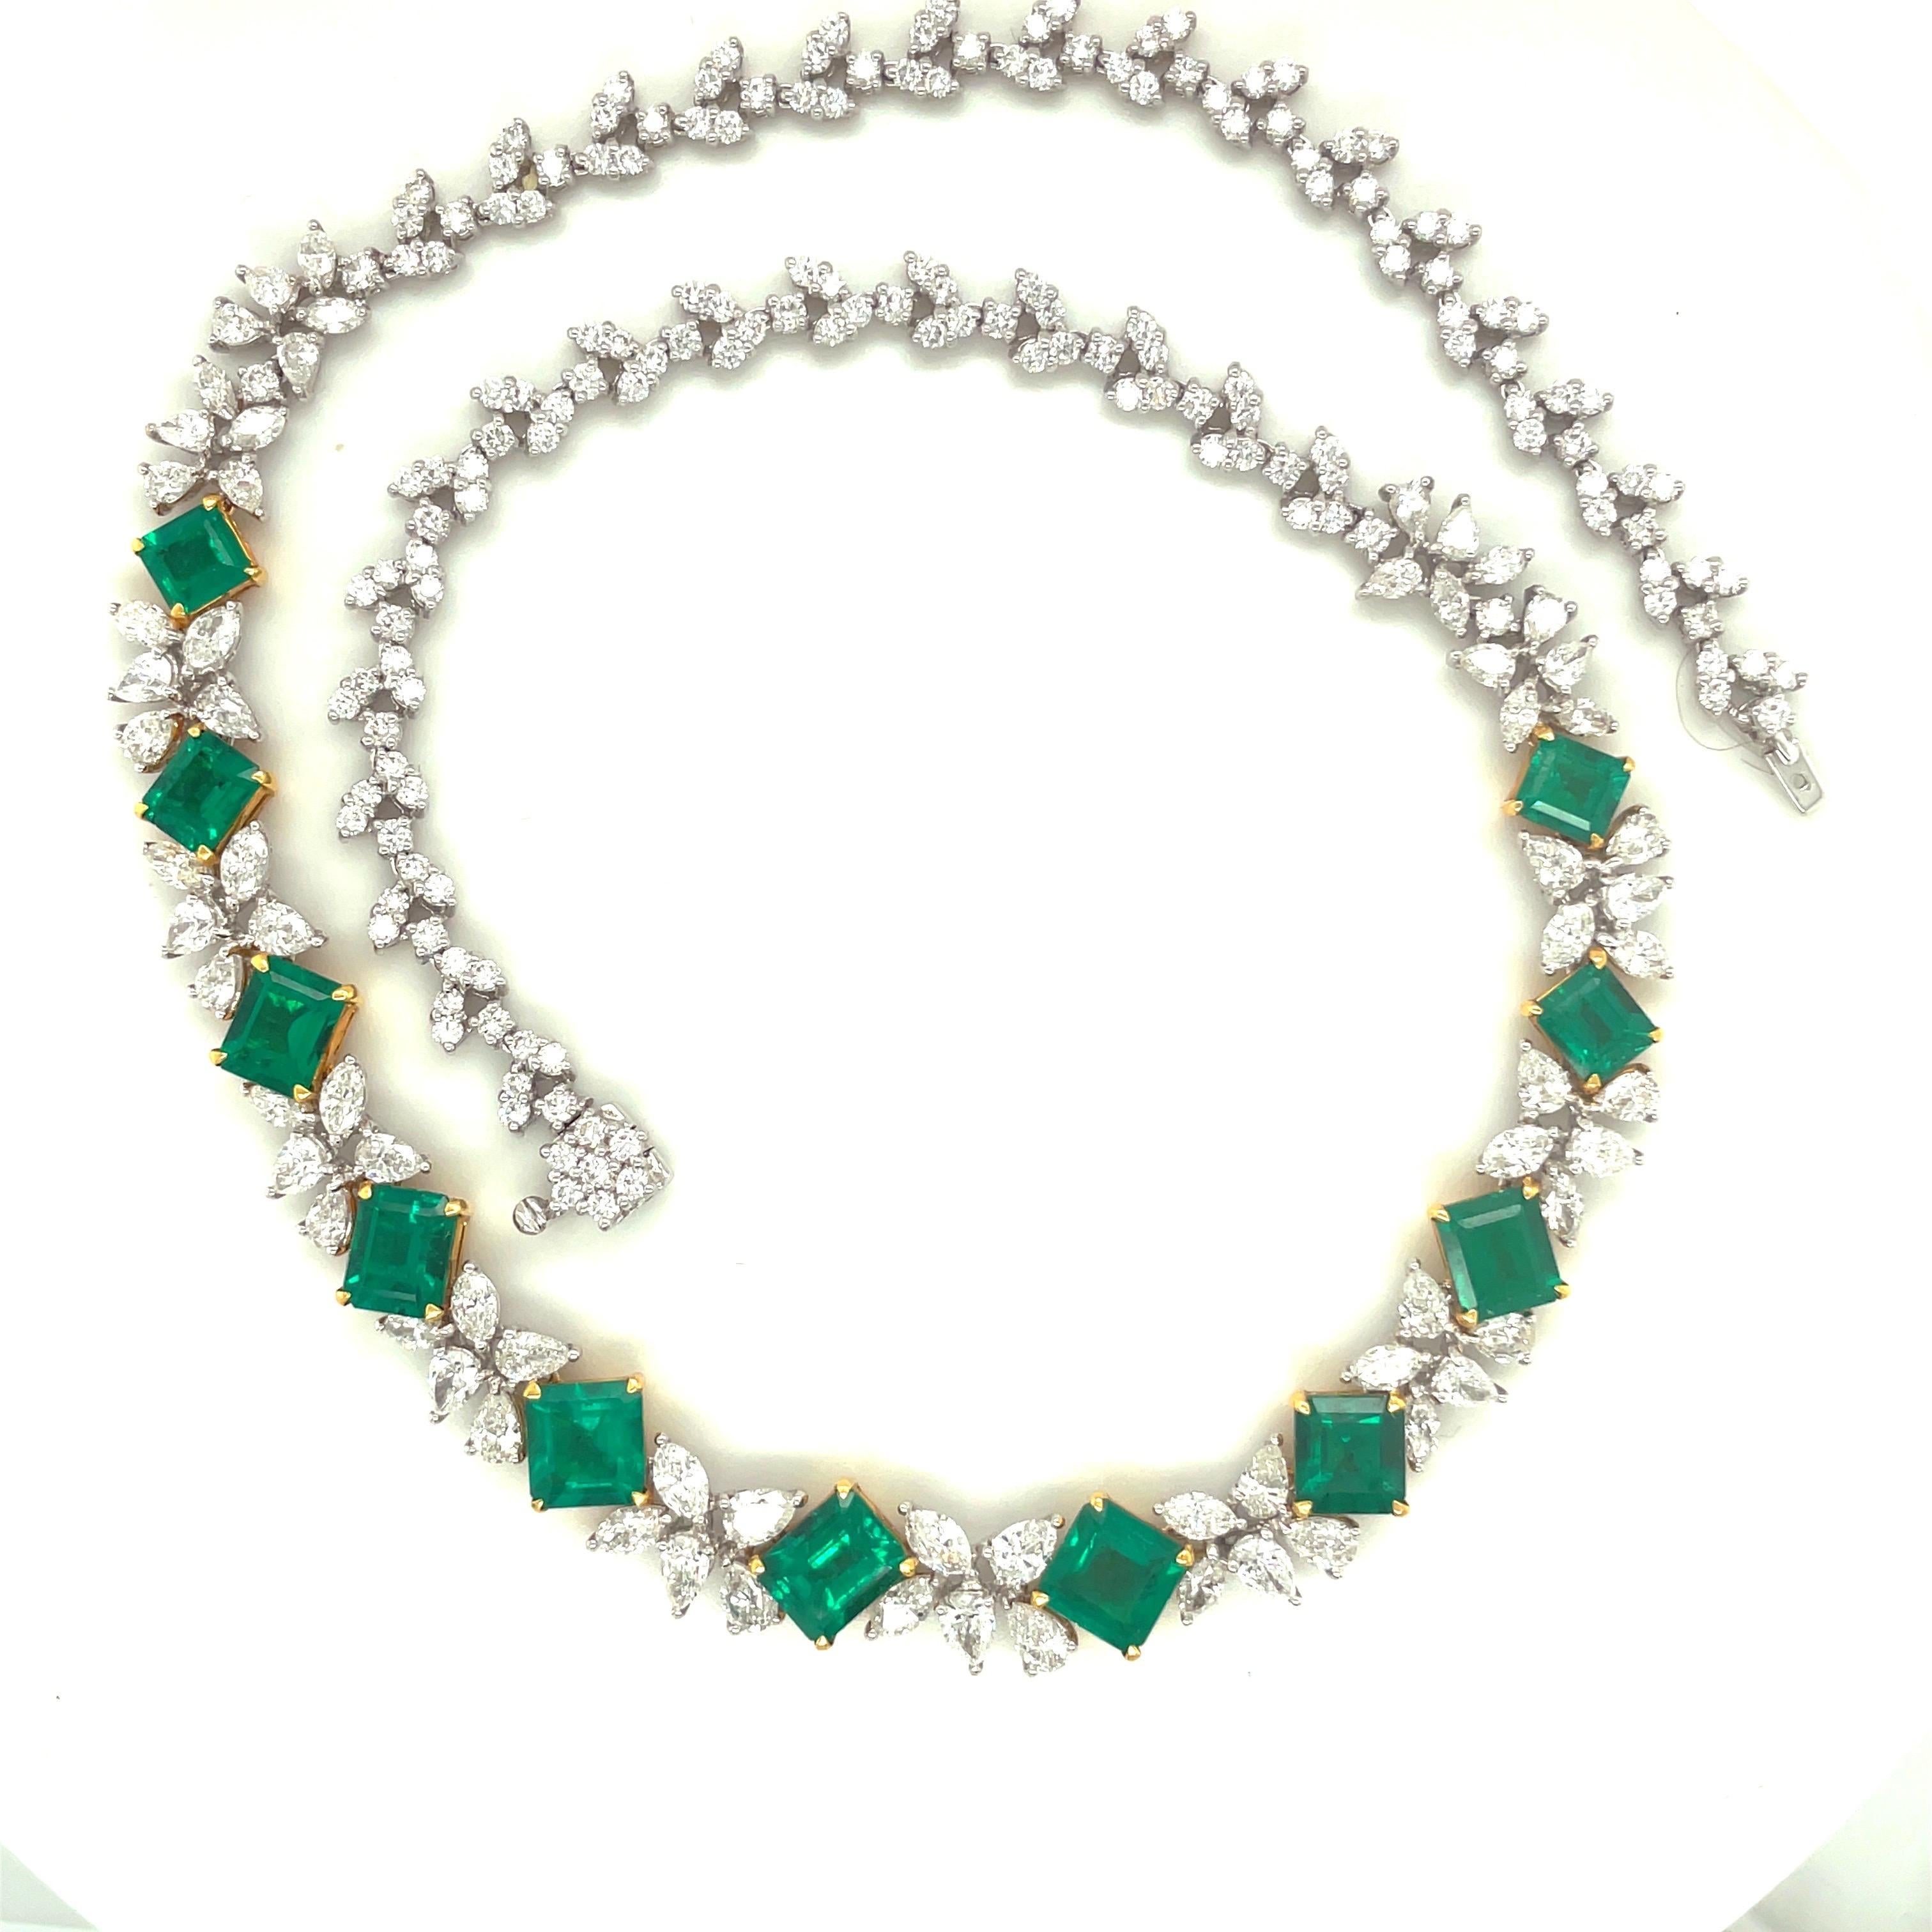 Cellini Jewelers 18KT White/Yellow Gold 12.33Ct Emerald 13.68Ct Diamond Necklace For Sale 3